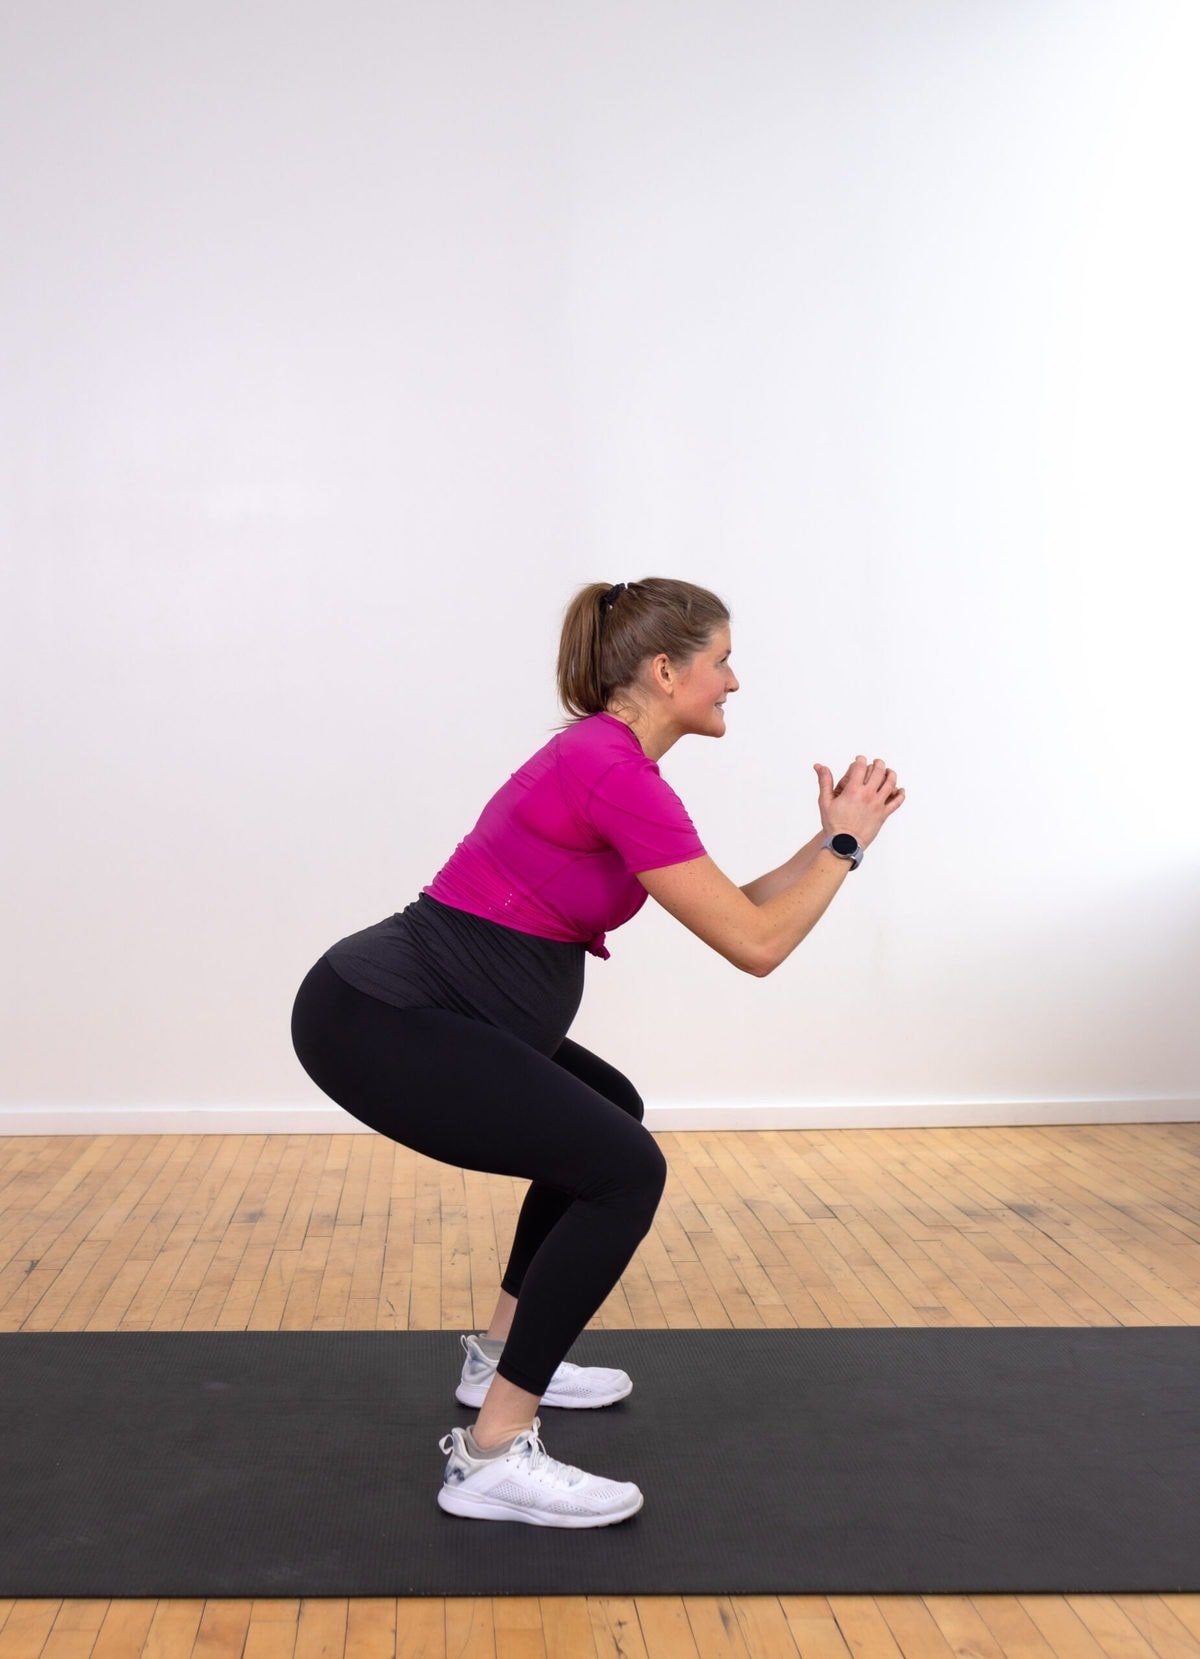 6 Pregnancy Safe Exercises For All Trimesters (No Equipment